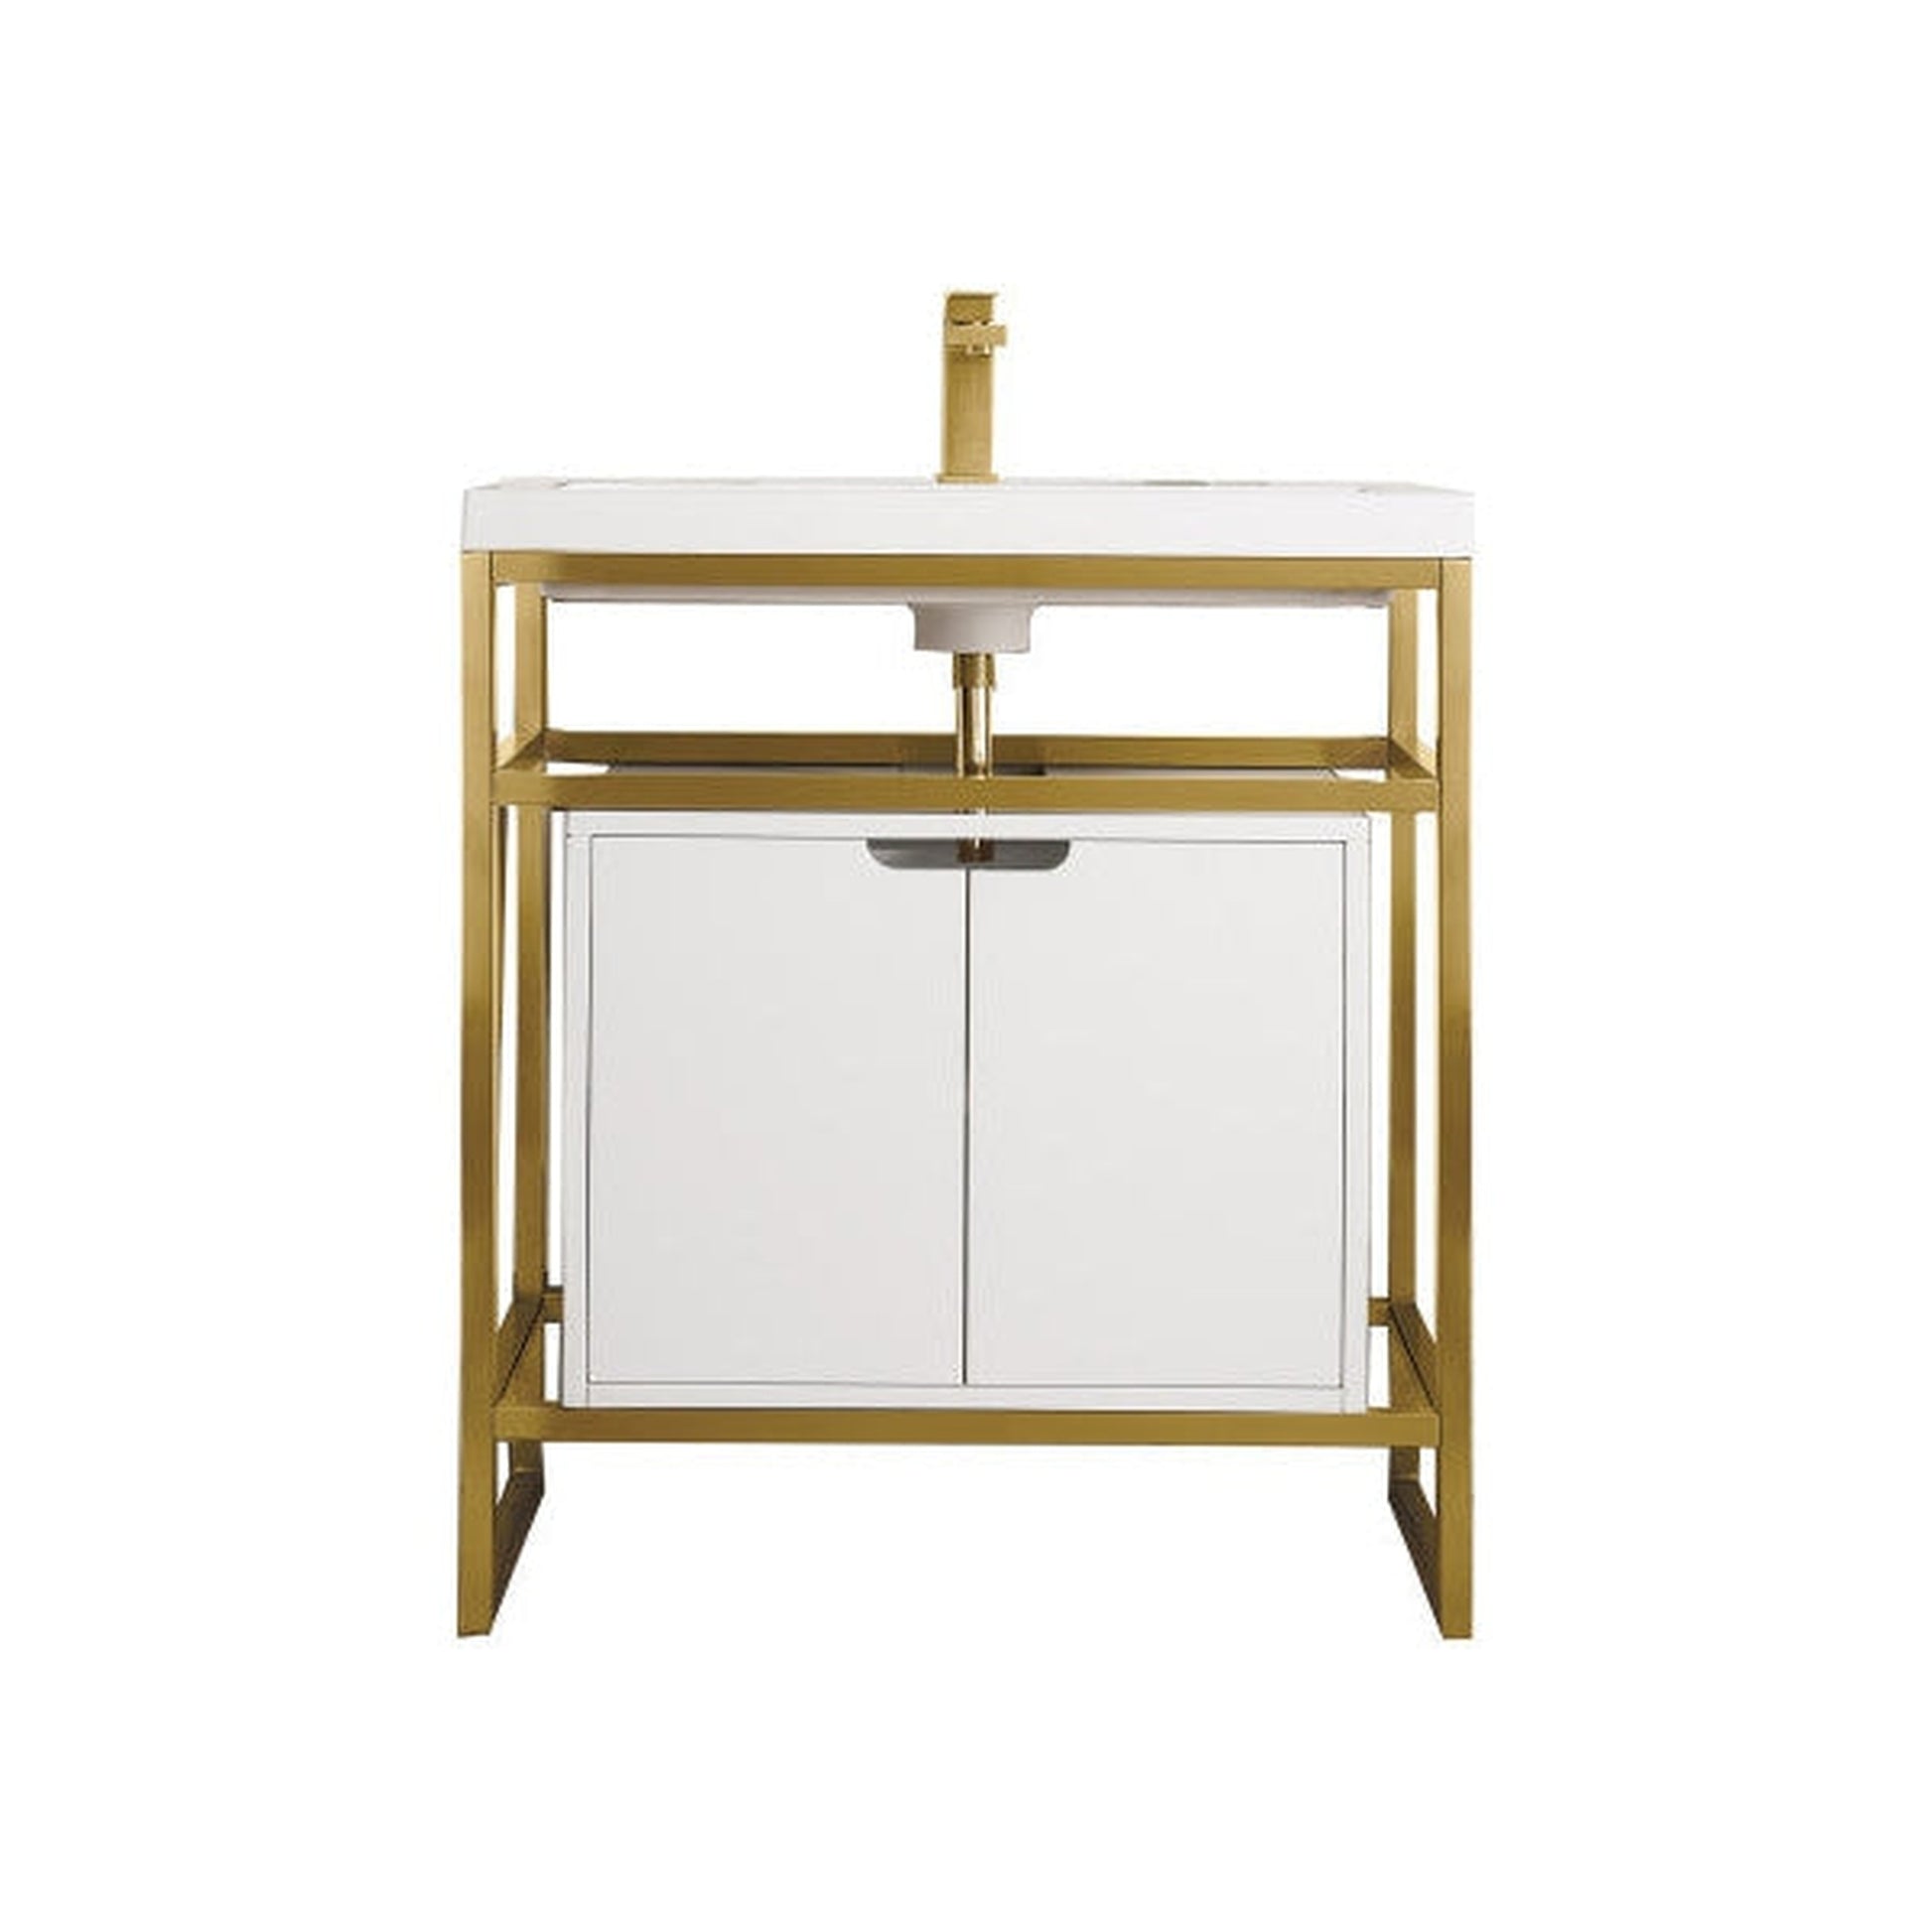 James Martin Boston 32" Single Radiant Gold Stainless Steel Console Sink With Glossy White Storage Cabinet and White Glossy Composite Countertop